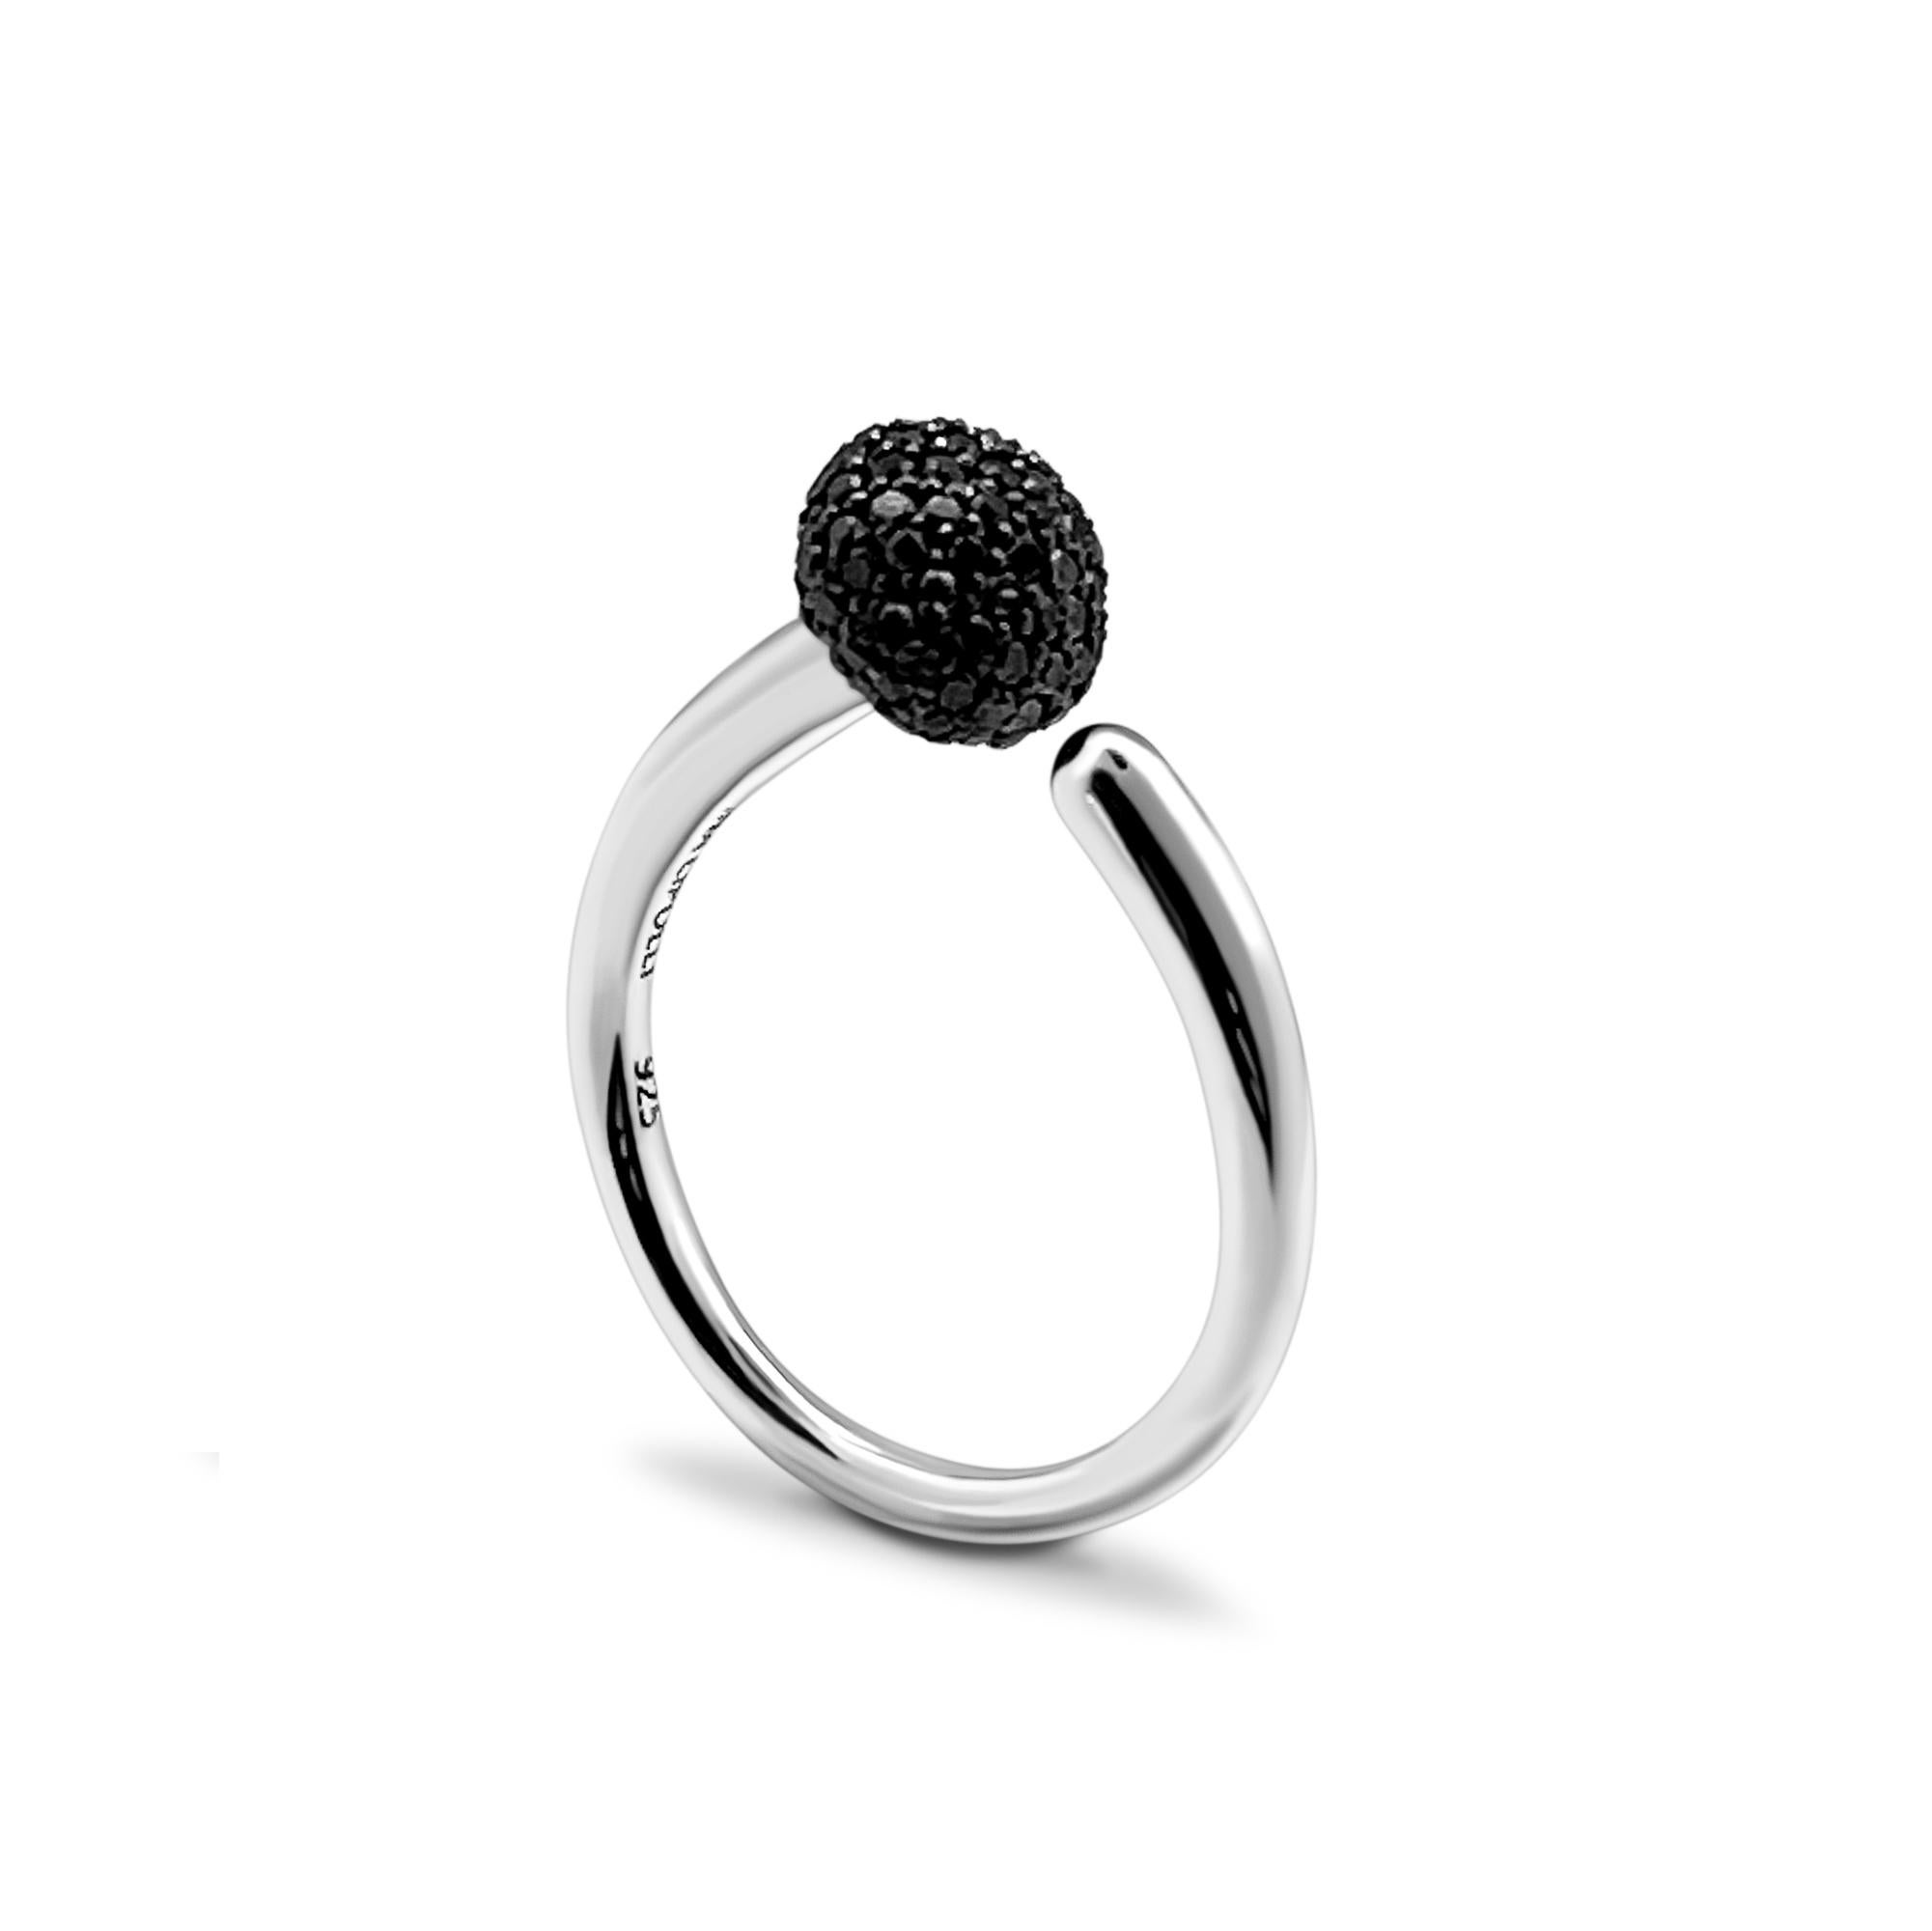 Contemporary cocktail ring in polished silver, set with black diamonds pave. Elegant and modern design inspired by the boldness and power of sterling silver metal. Gemstones: black diamonds (round 1 mm, 90 pieces). Out of stock at the moment.